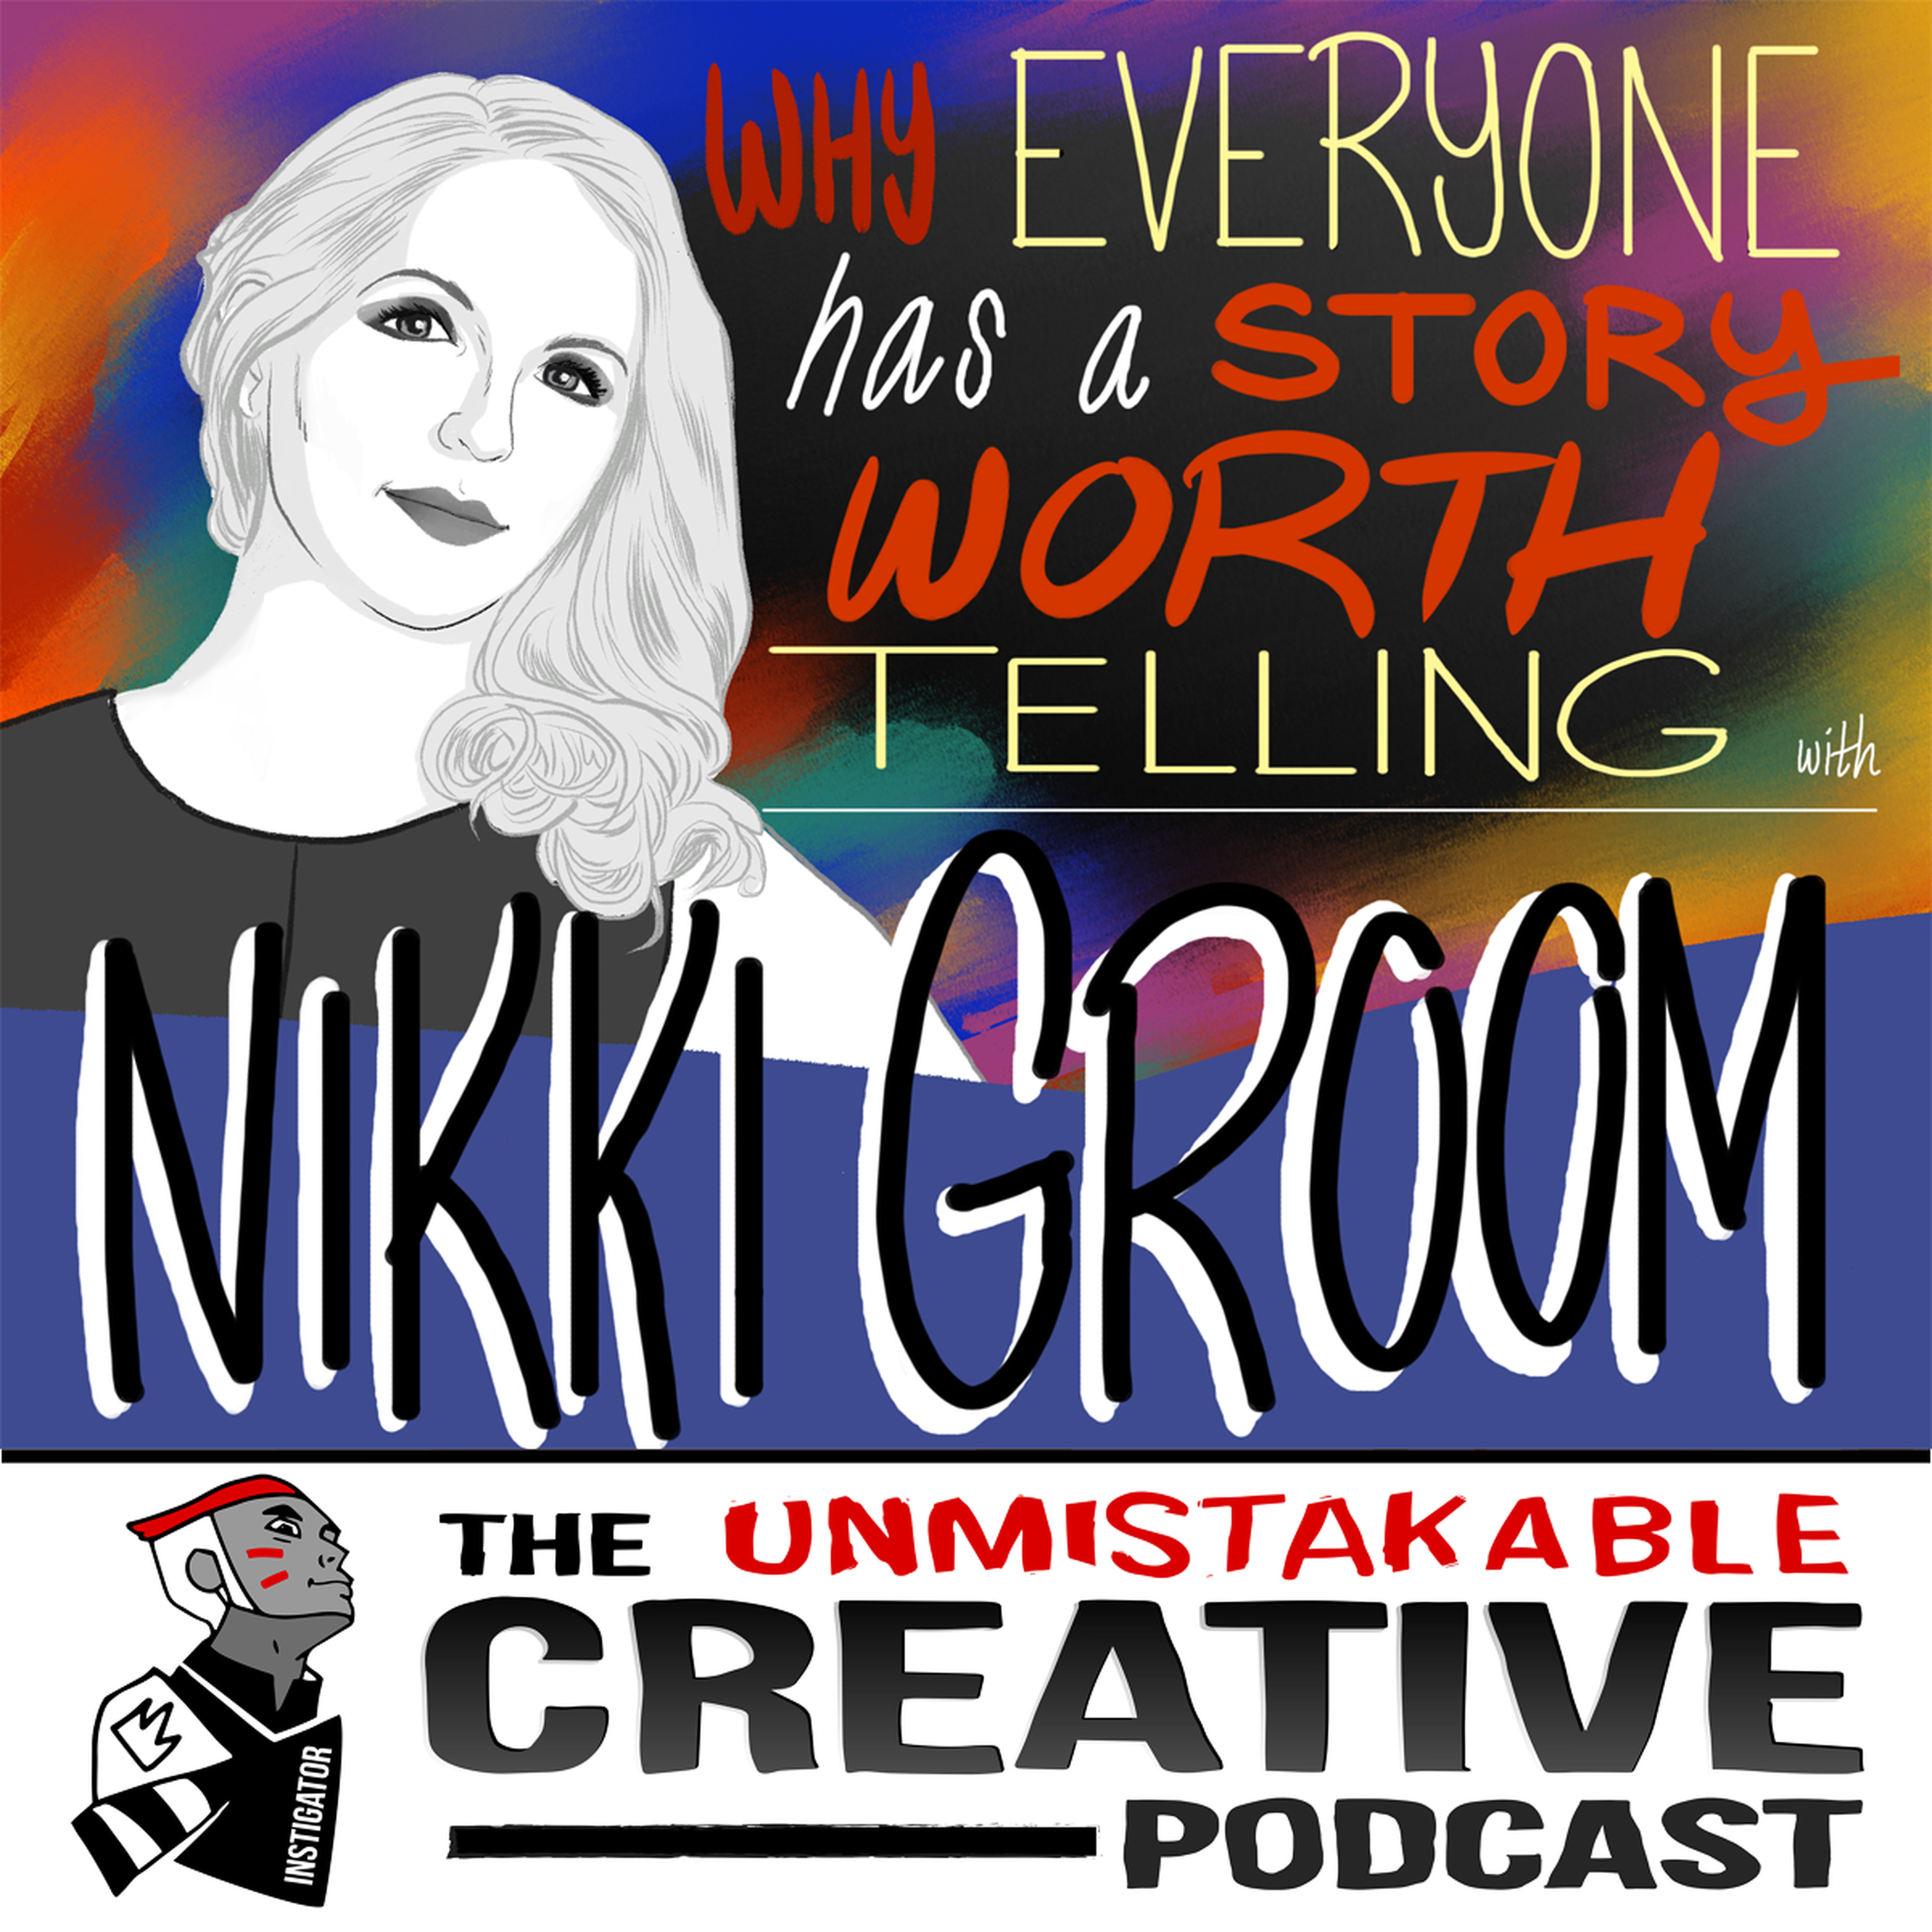 Nikki Groom: Why Everyone Has a Story Worth Telling